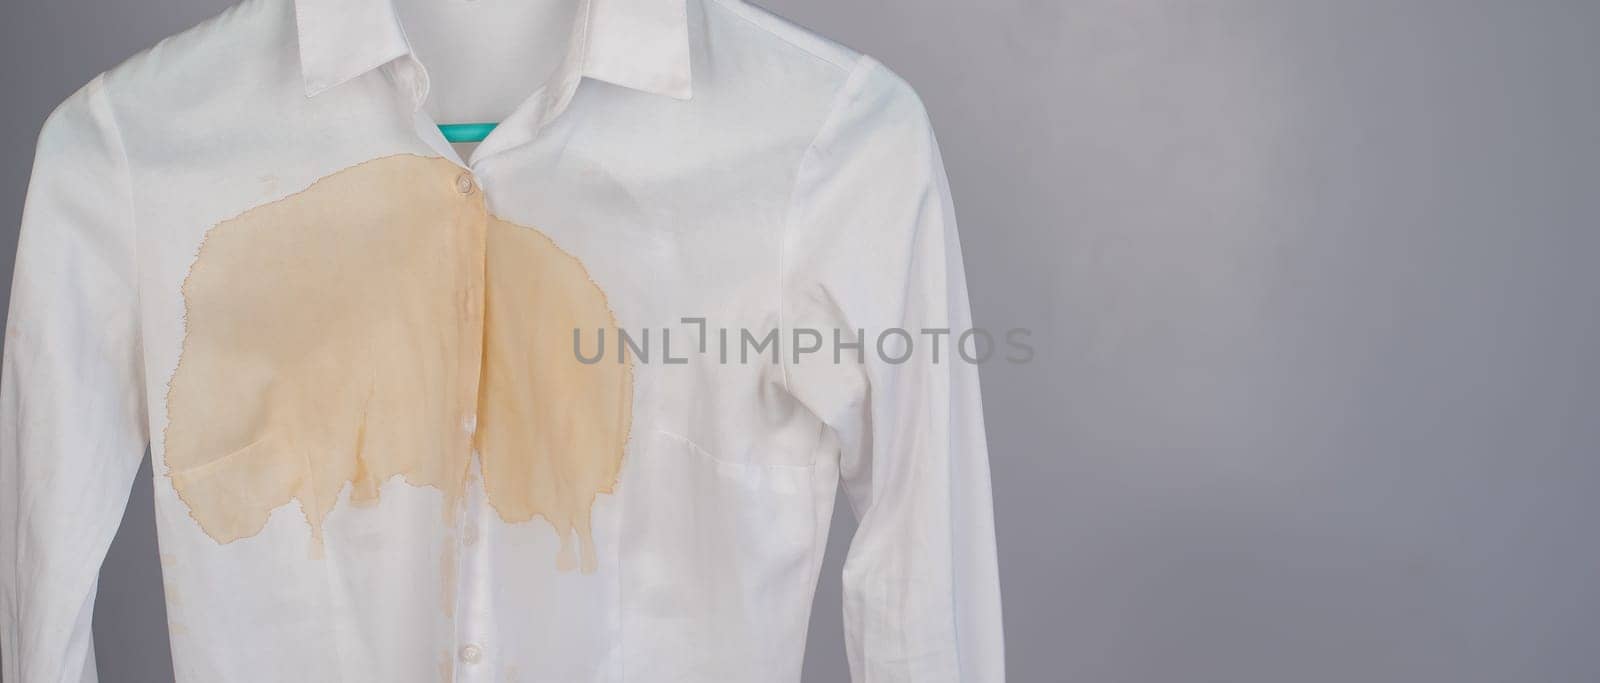 Women's office white shirt with a stain of coffee on a white background. Copy space